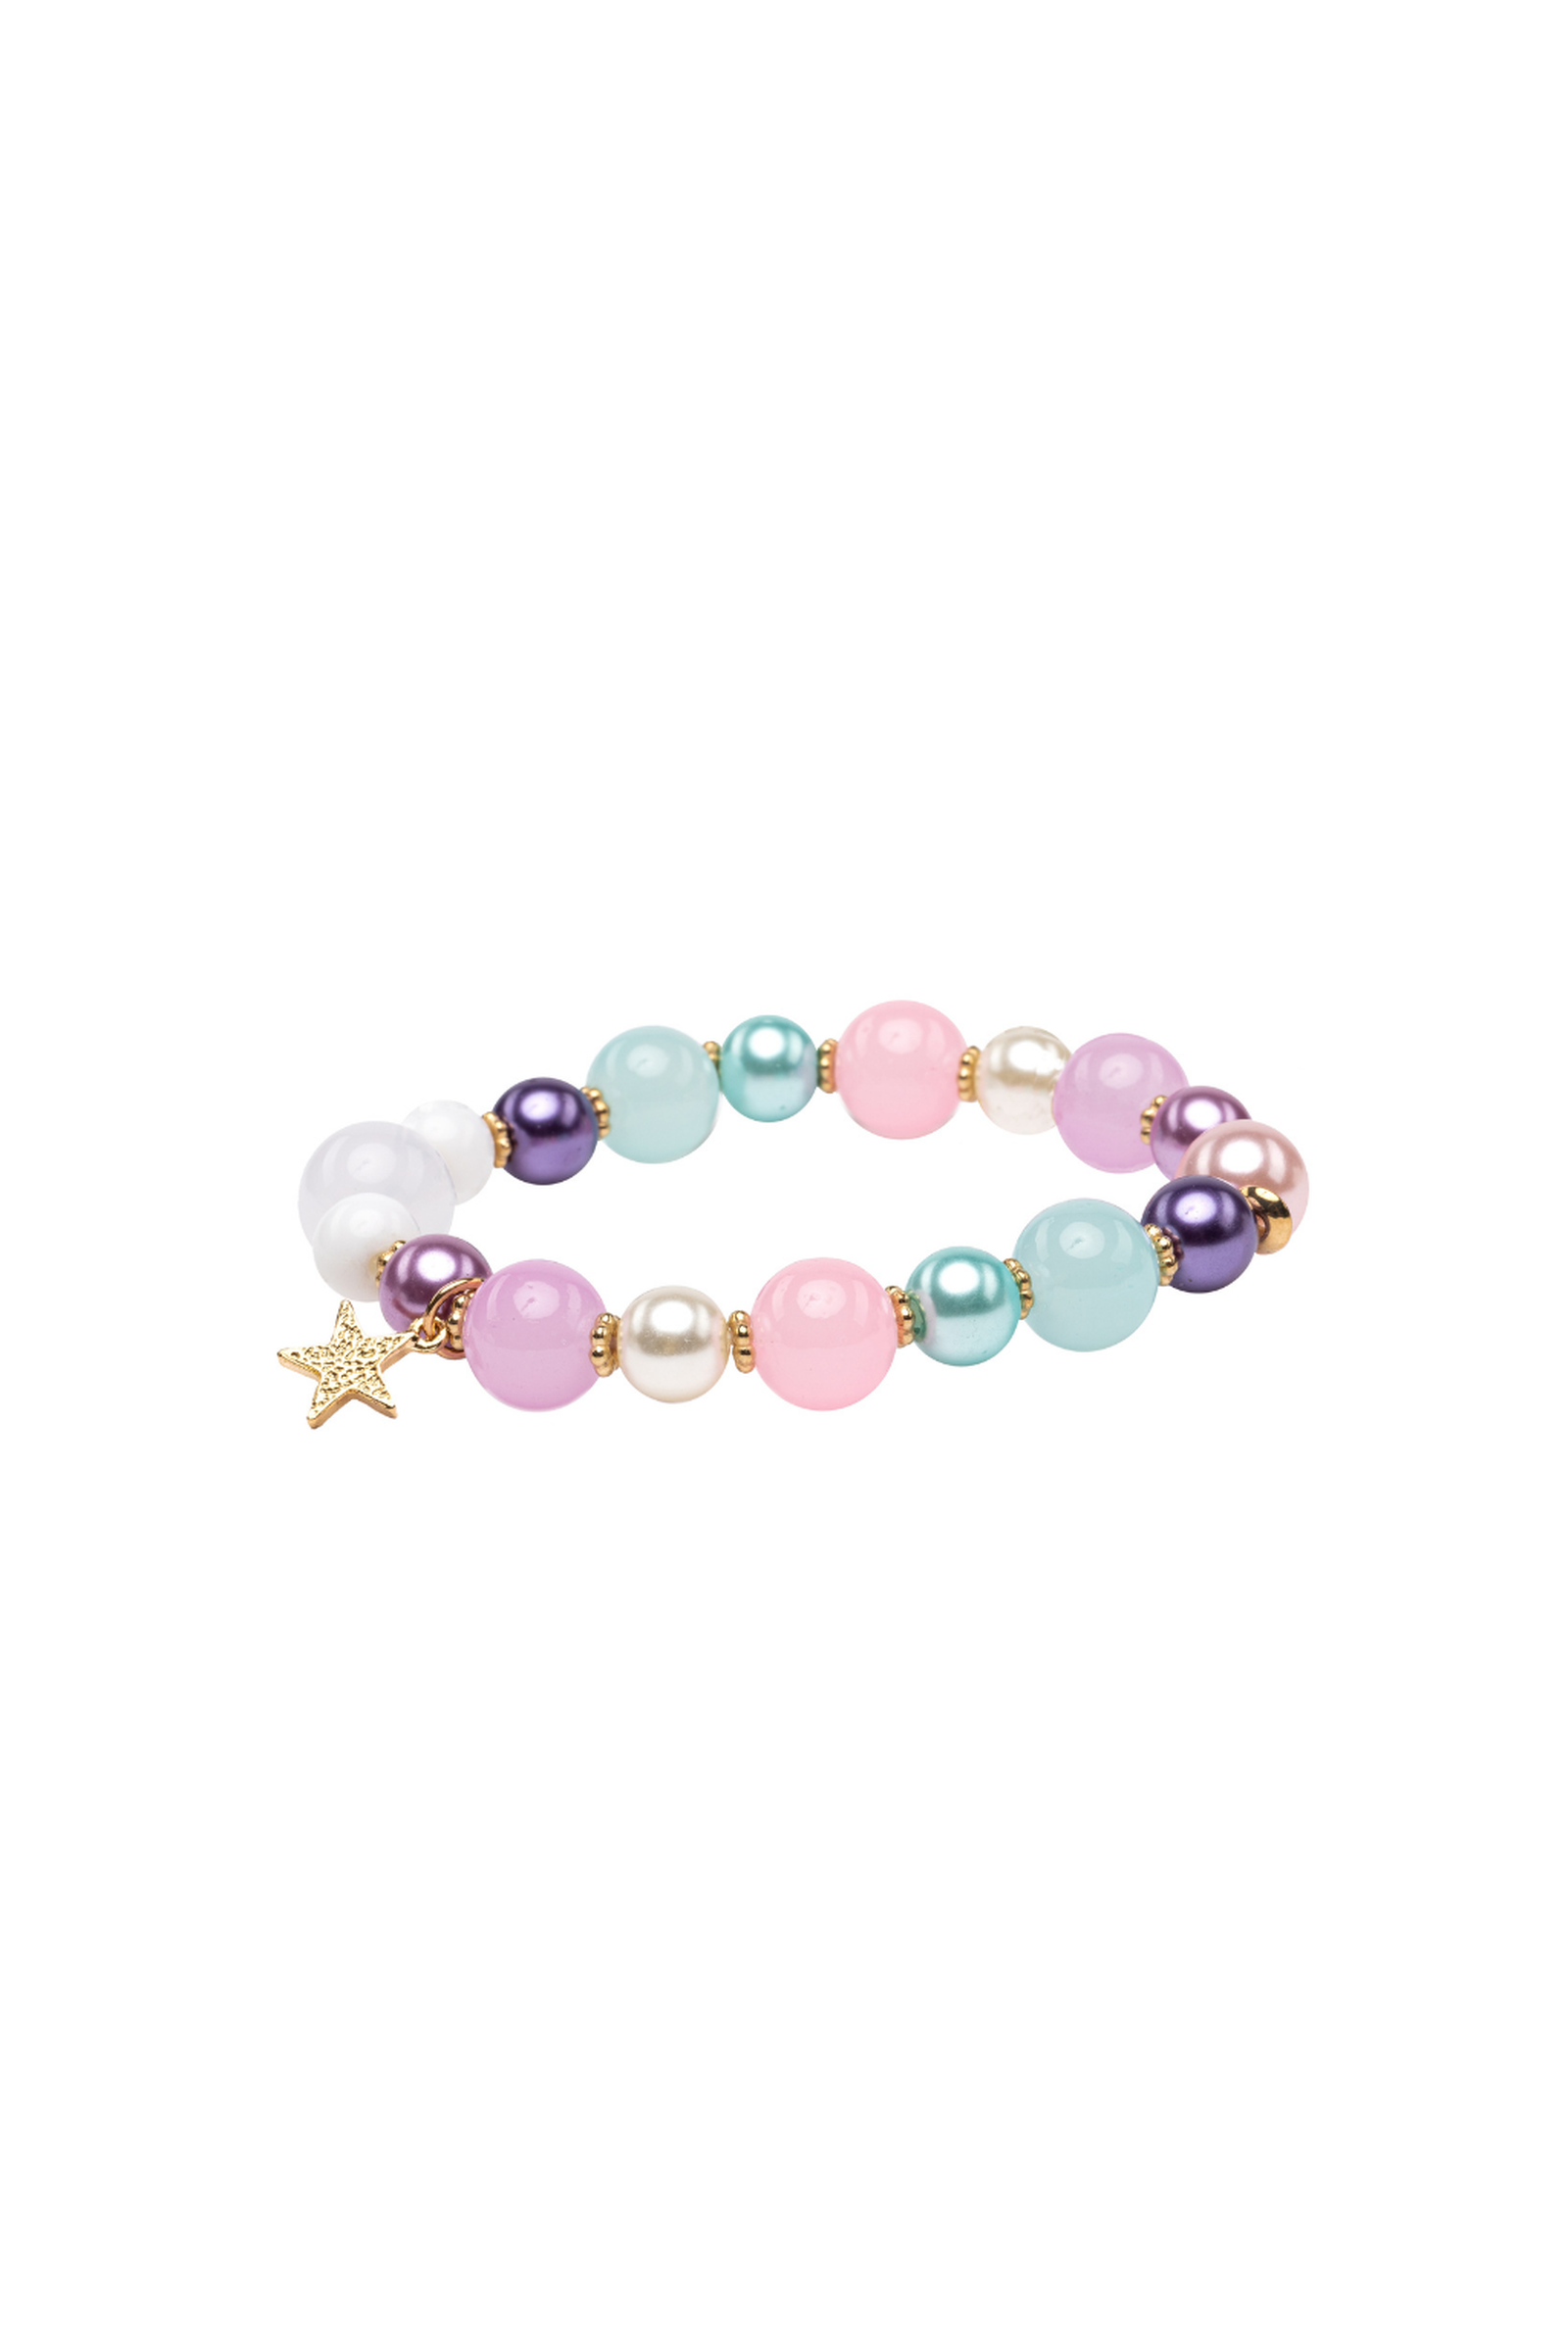 the boutique star bracelet on a white background